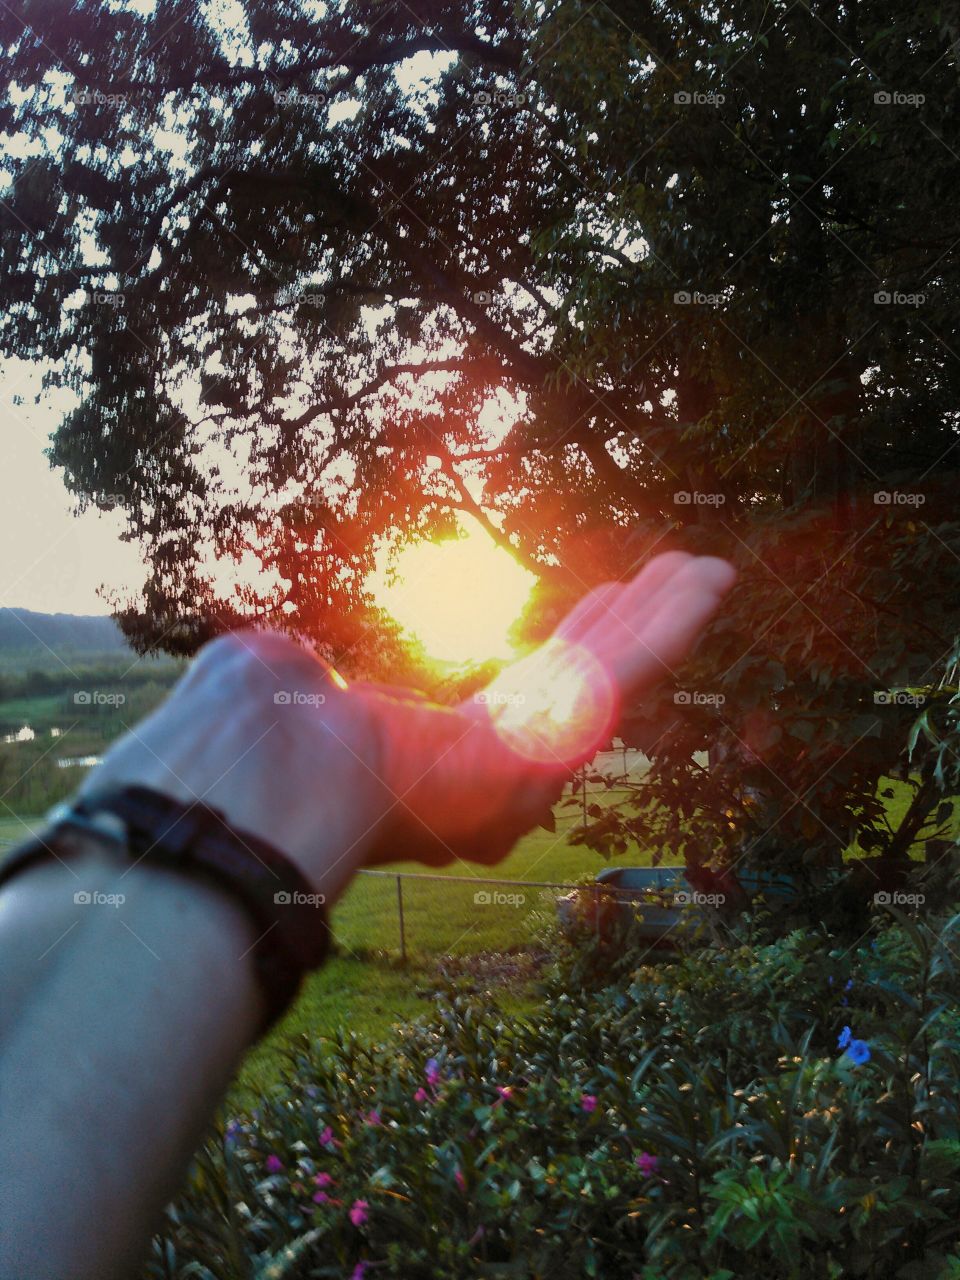 Holding the sun. Get hands on with nature